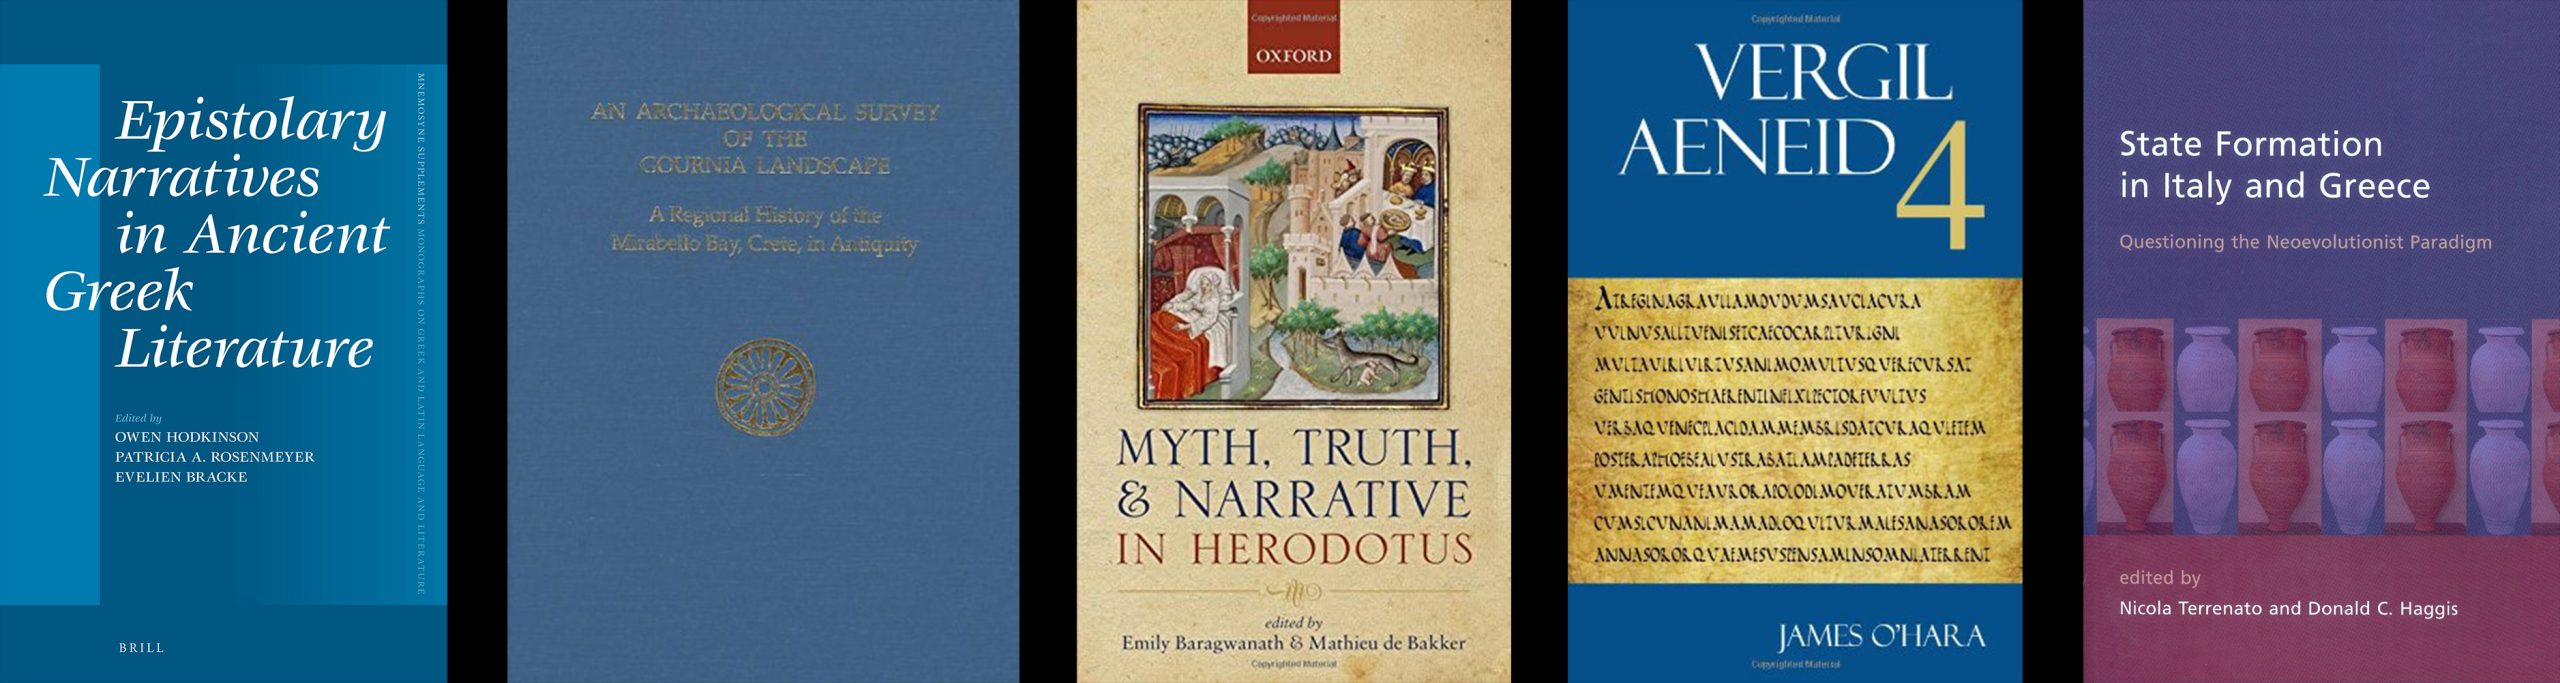 1. Epistolary Narratives in Ancient Greek Literature edited by Owen Hodkinson, Patricia A. Rosenmeyer, Evenlien Bracke. 2. An Archaeological Survey of the Gournia Landscape: A Regional History of the Mirabella Bay, Crete, in Antiquity. 3. Myth, Truth, and Narrative in Herodotus edited by Emily Baragwanath and Mathieu de Bakker. 4. Vergil: Aeneid 4 by James O'Hara. 5. State Formation in Italy and Greece: Questioning the Neoevolusionist Paradigm edited by Nicola Terrenato and Donald C. Haggis.